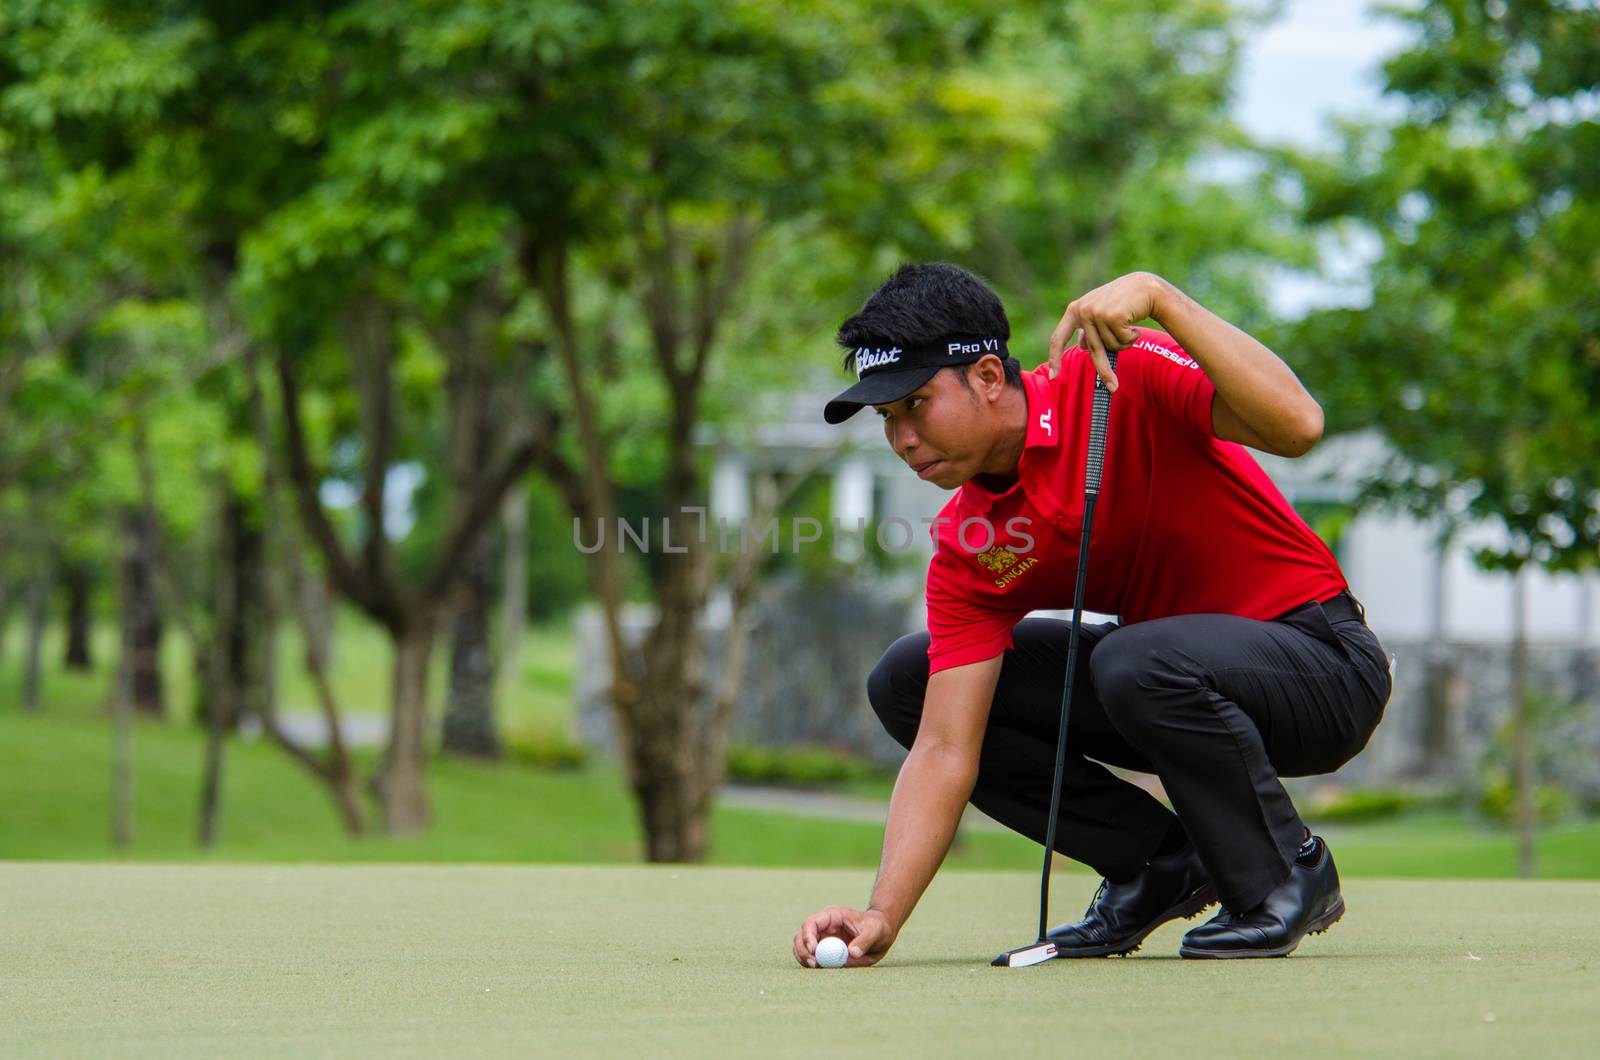 CHONBURI - JULY 31 : Danthai Boonma of Thailand in King's Cup 2016 at Phoenix Gold Golf & Country Club Pattaya on July 31, 2016 in Chonburi, Thailand.